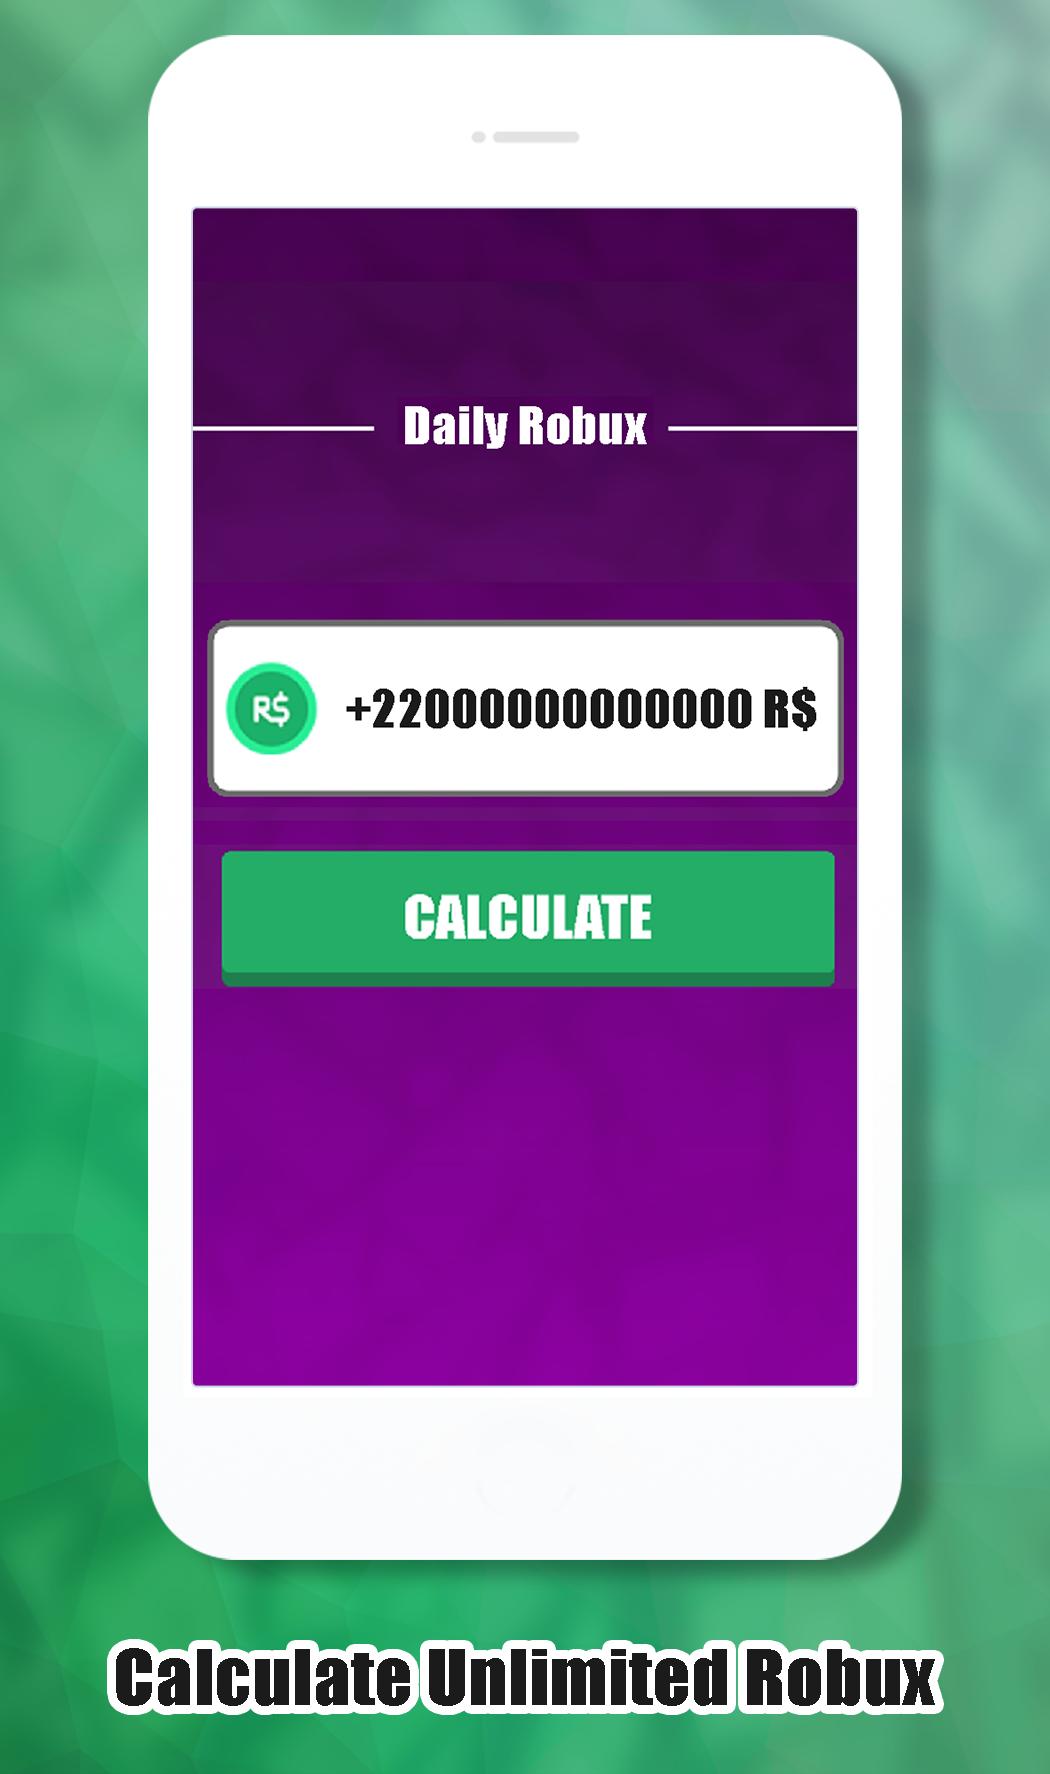 Daily Free Robux Calculator For Roblox Prank For Android Apk Download - download cheats for roblox unlimited prank 3 apk 2019 update